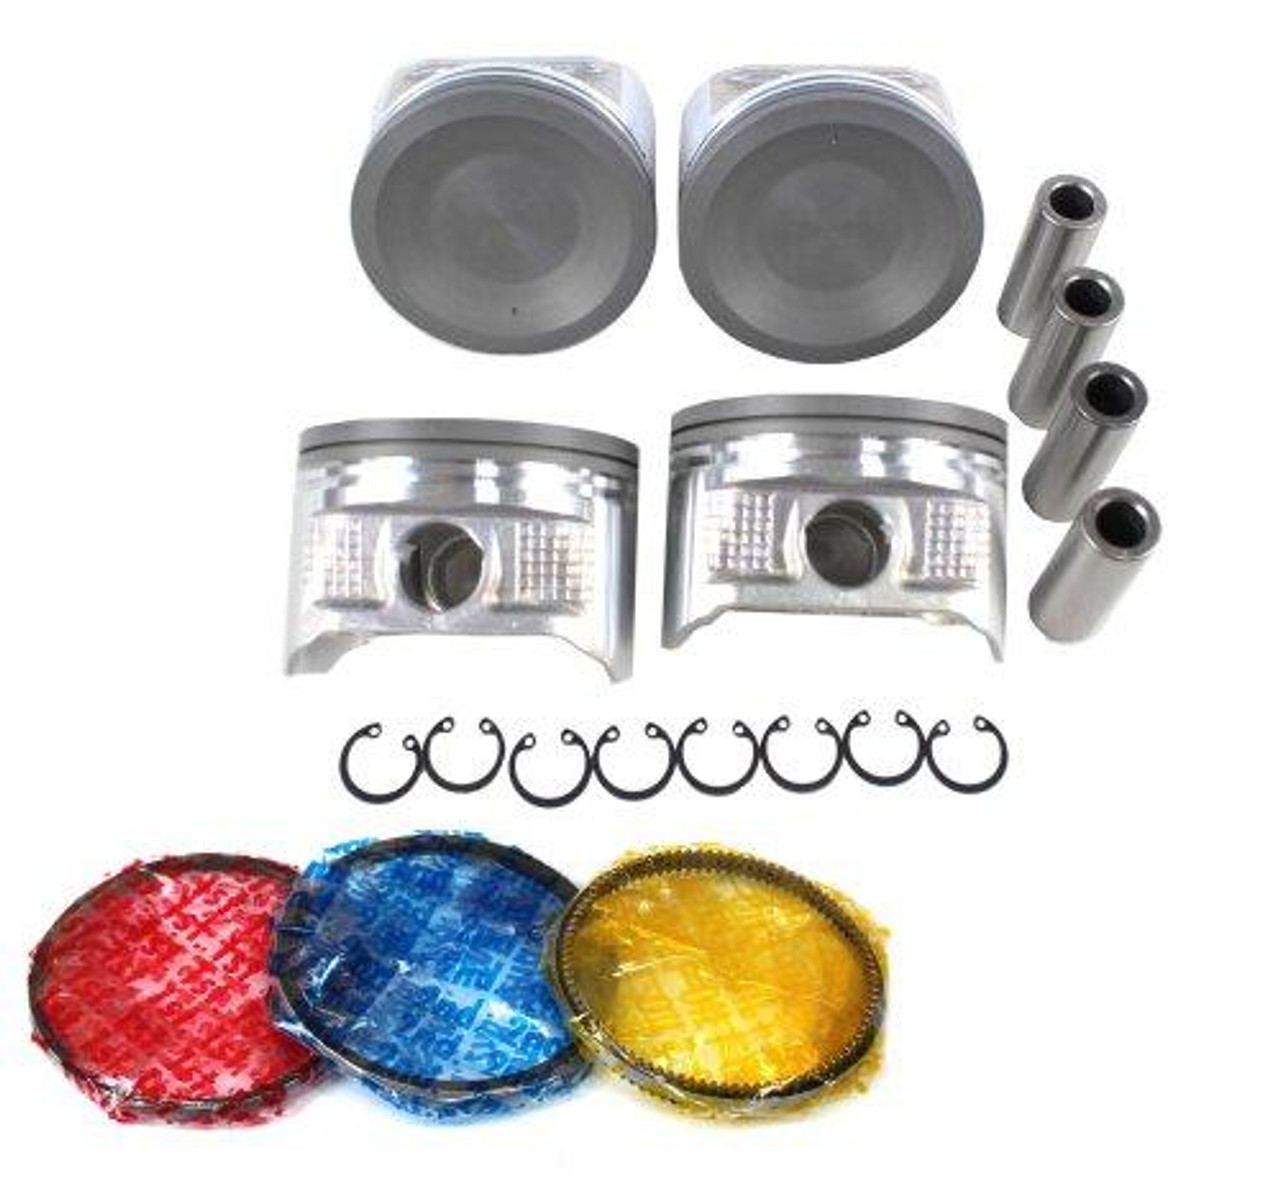 Piston Set with Rings - 2000 Nissan Frontier 2.4L Engine Parts # PRK625ZE13